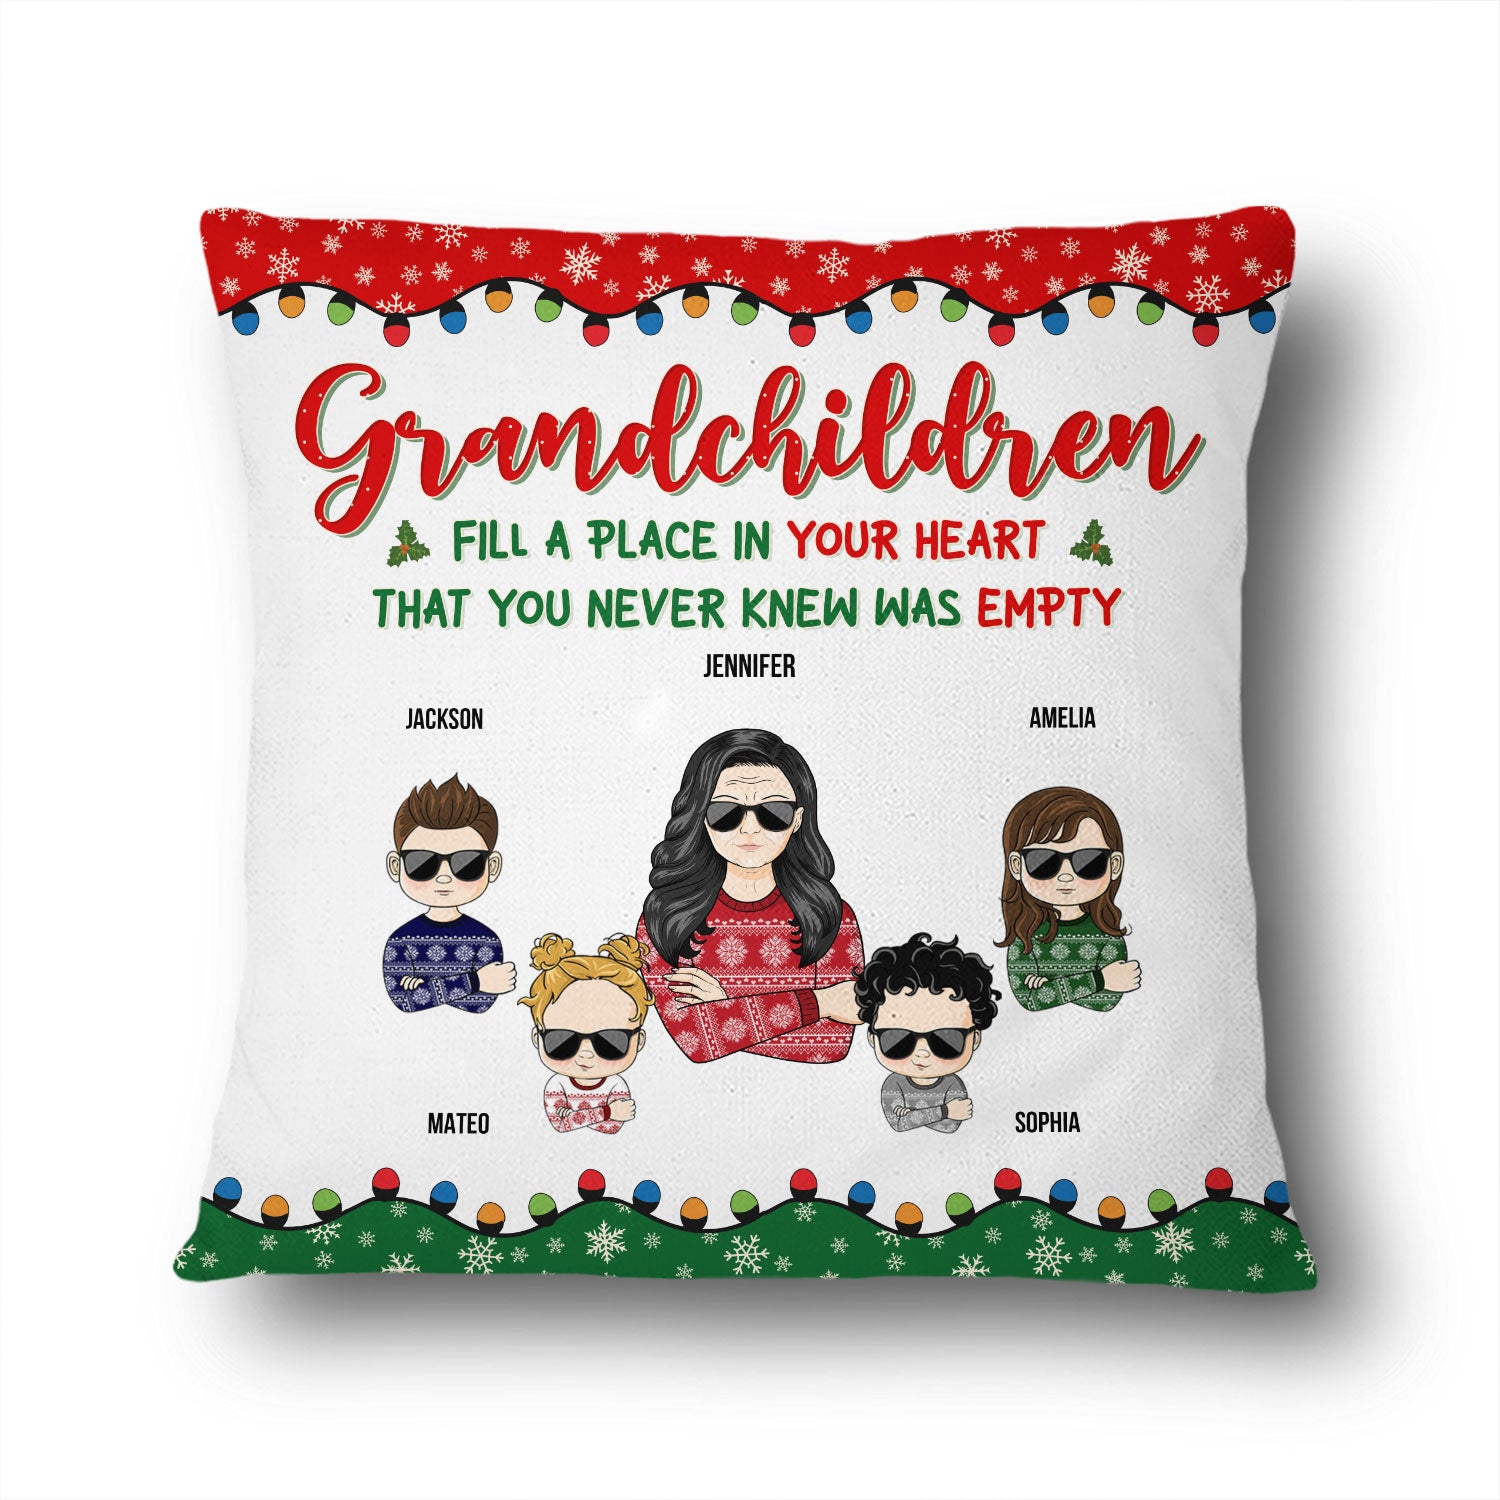 Grandchildren Fill A Place In Your Heart - Christmas Gift For Family - Personalized Custom Pillow